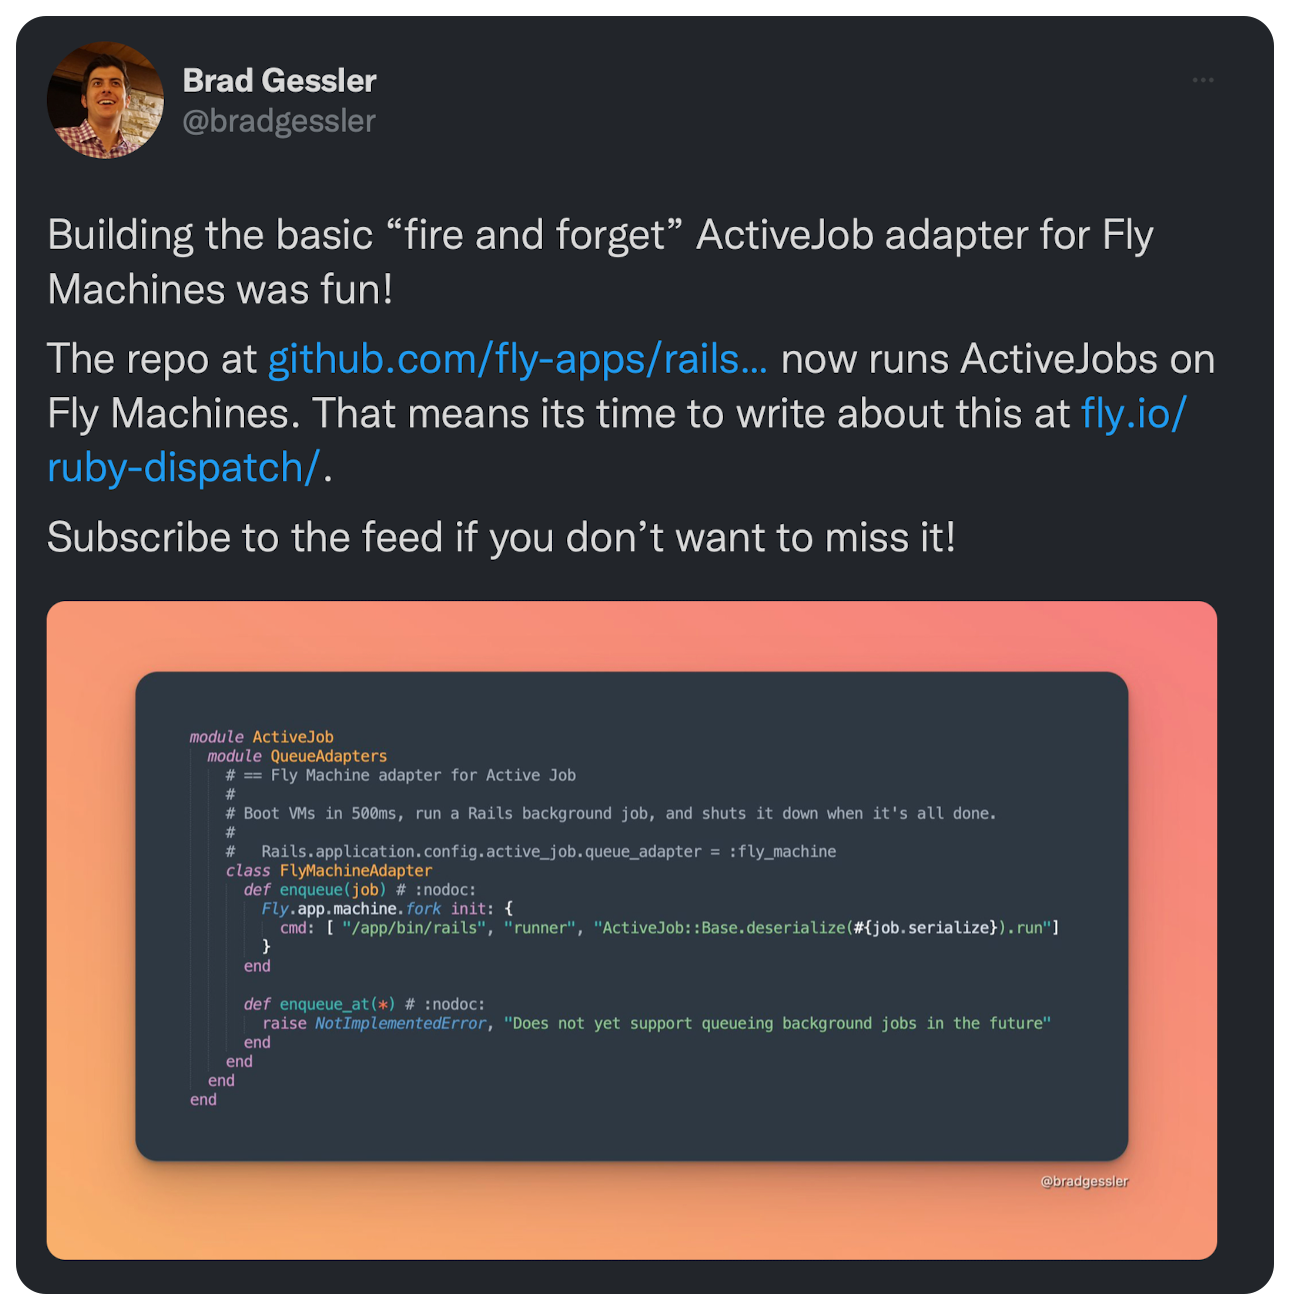 Building the basic “fire and forget” ActiveJob adapter for Fly Machines was fun!  The repo at github.com/fly-apps/rails… now runs ActiveJobs on Fly Machines. That means its time to write about this at fly.io/ruby-dispatch/.   Subscribe to the feed if you don’t want to miss it!